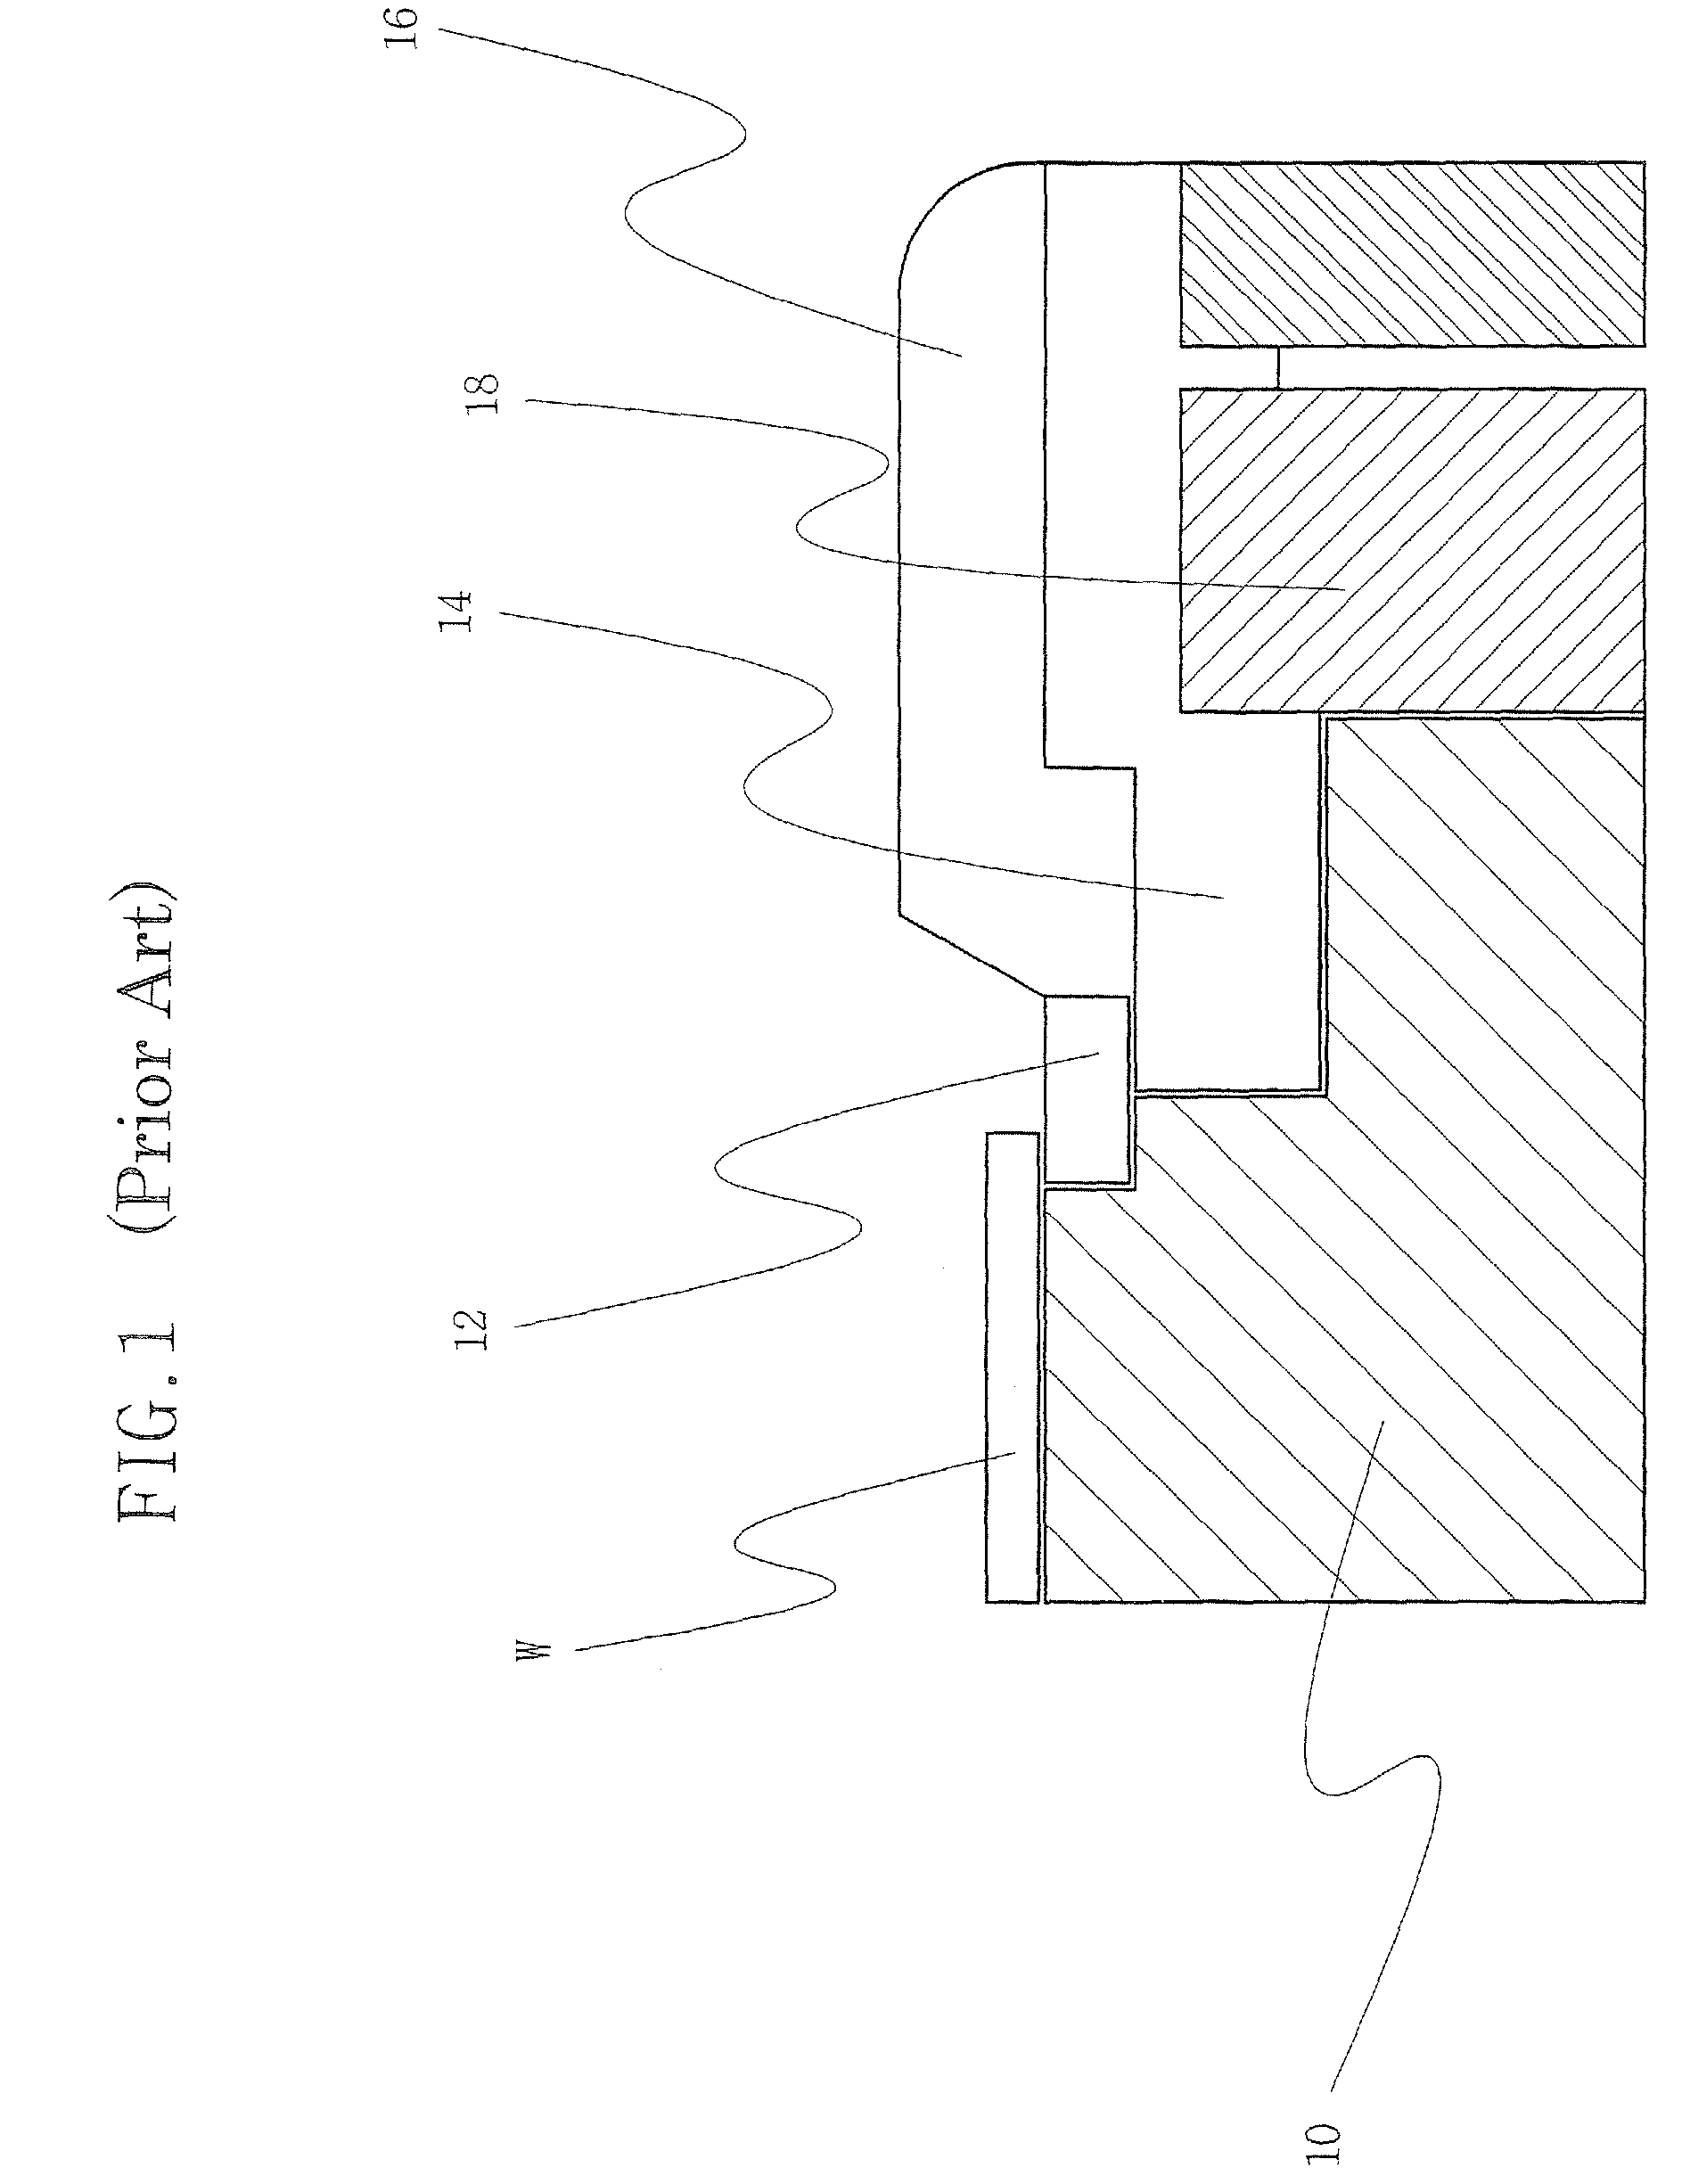 Semiconductor etching apparatus